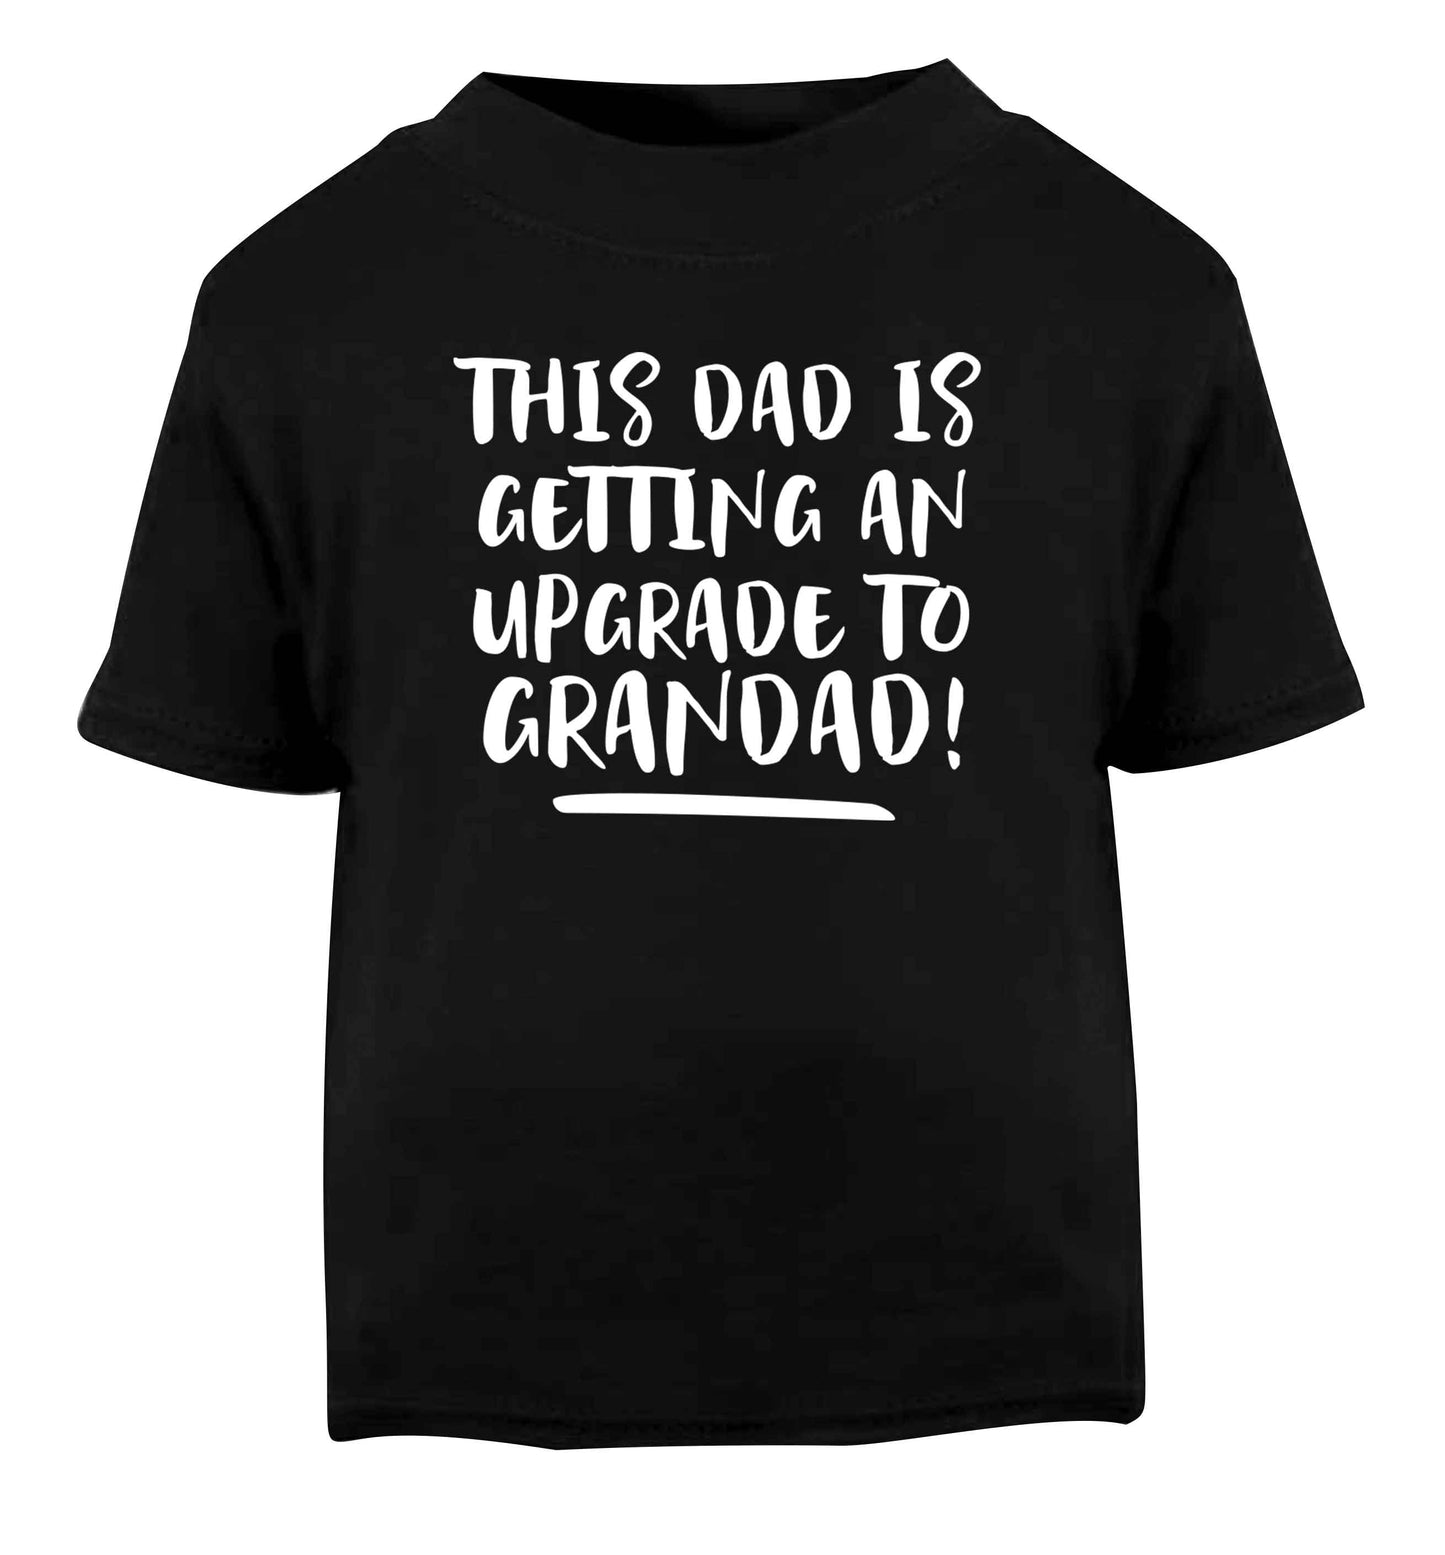 This dad is getting an upgrade to grandad! Black Baby Toddler Tshirt 2 years